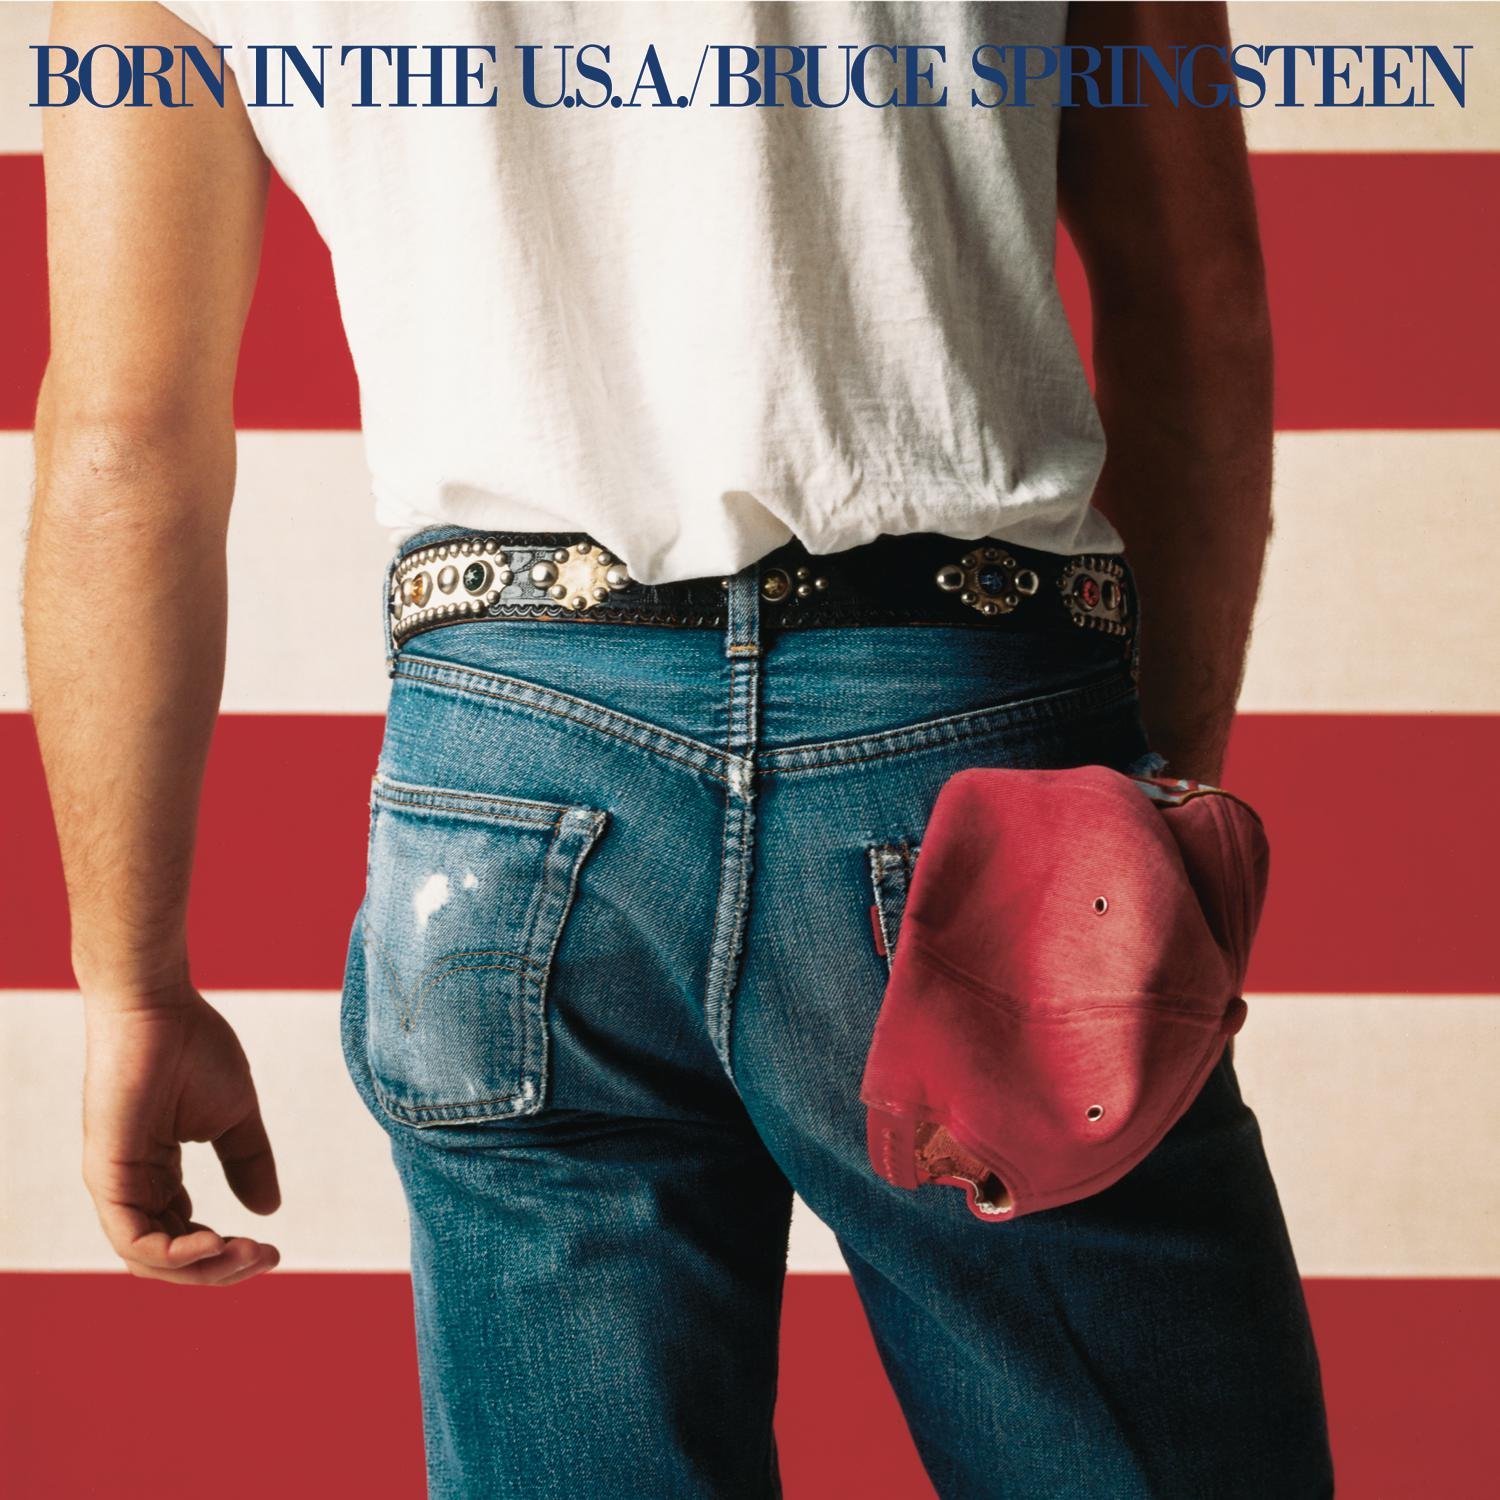 50 Years, 50 Albums 1984: Bruce Springsteen ‘Born in the U.S.A.’